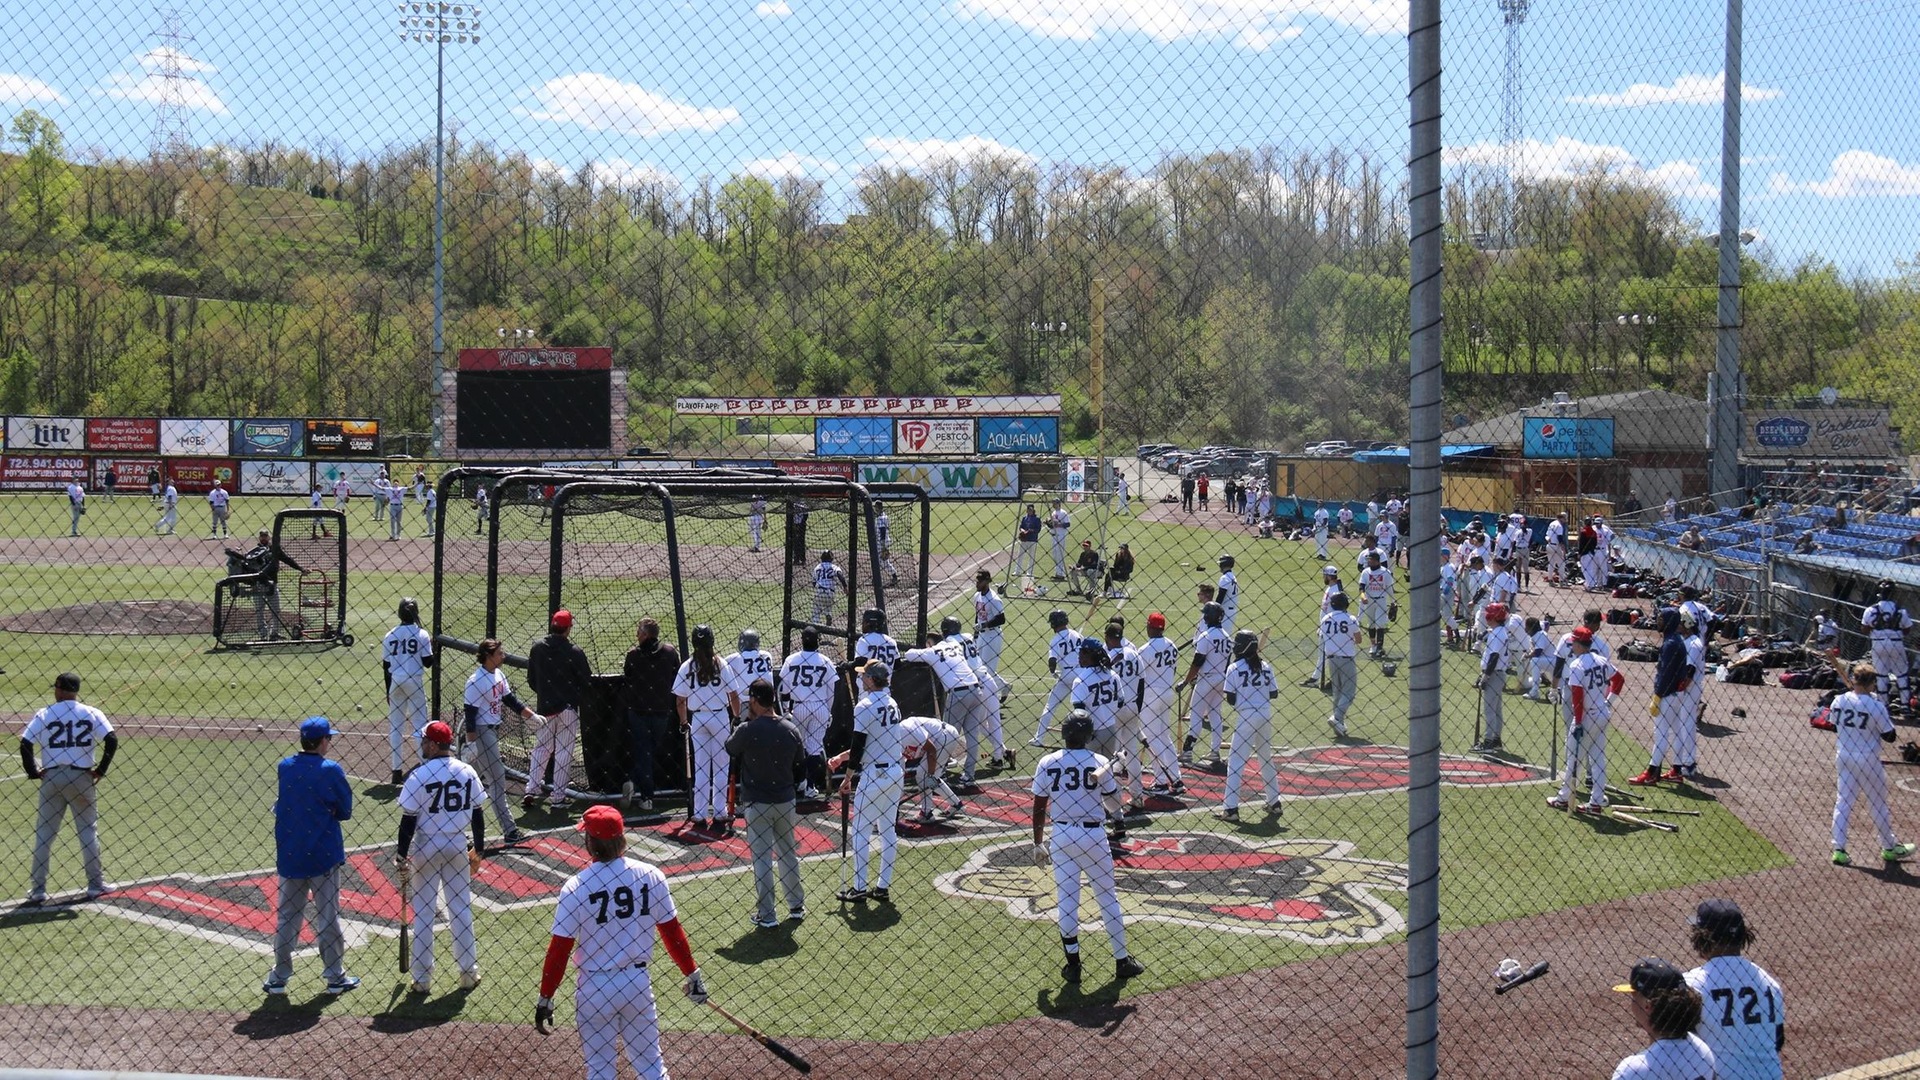 FRONTIER LEAGUE HOLDS ANNUAL TRYOUT CAMP & DRAFT